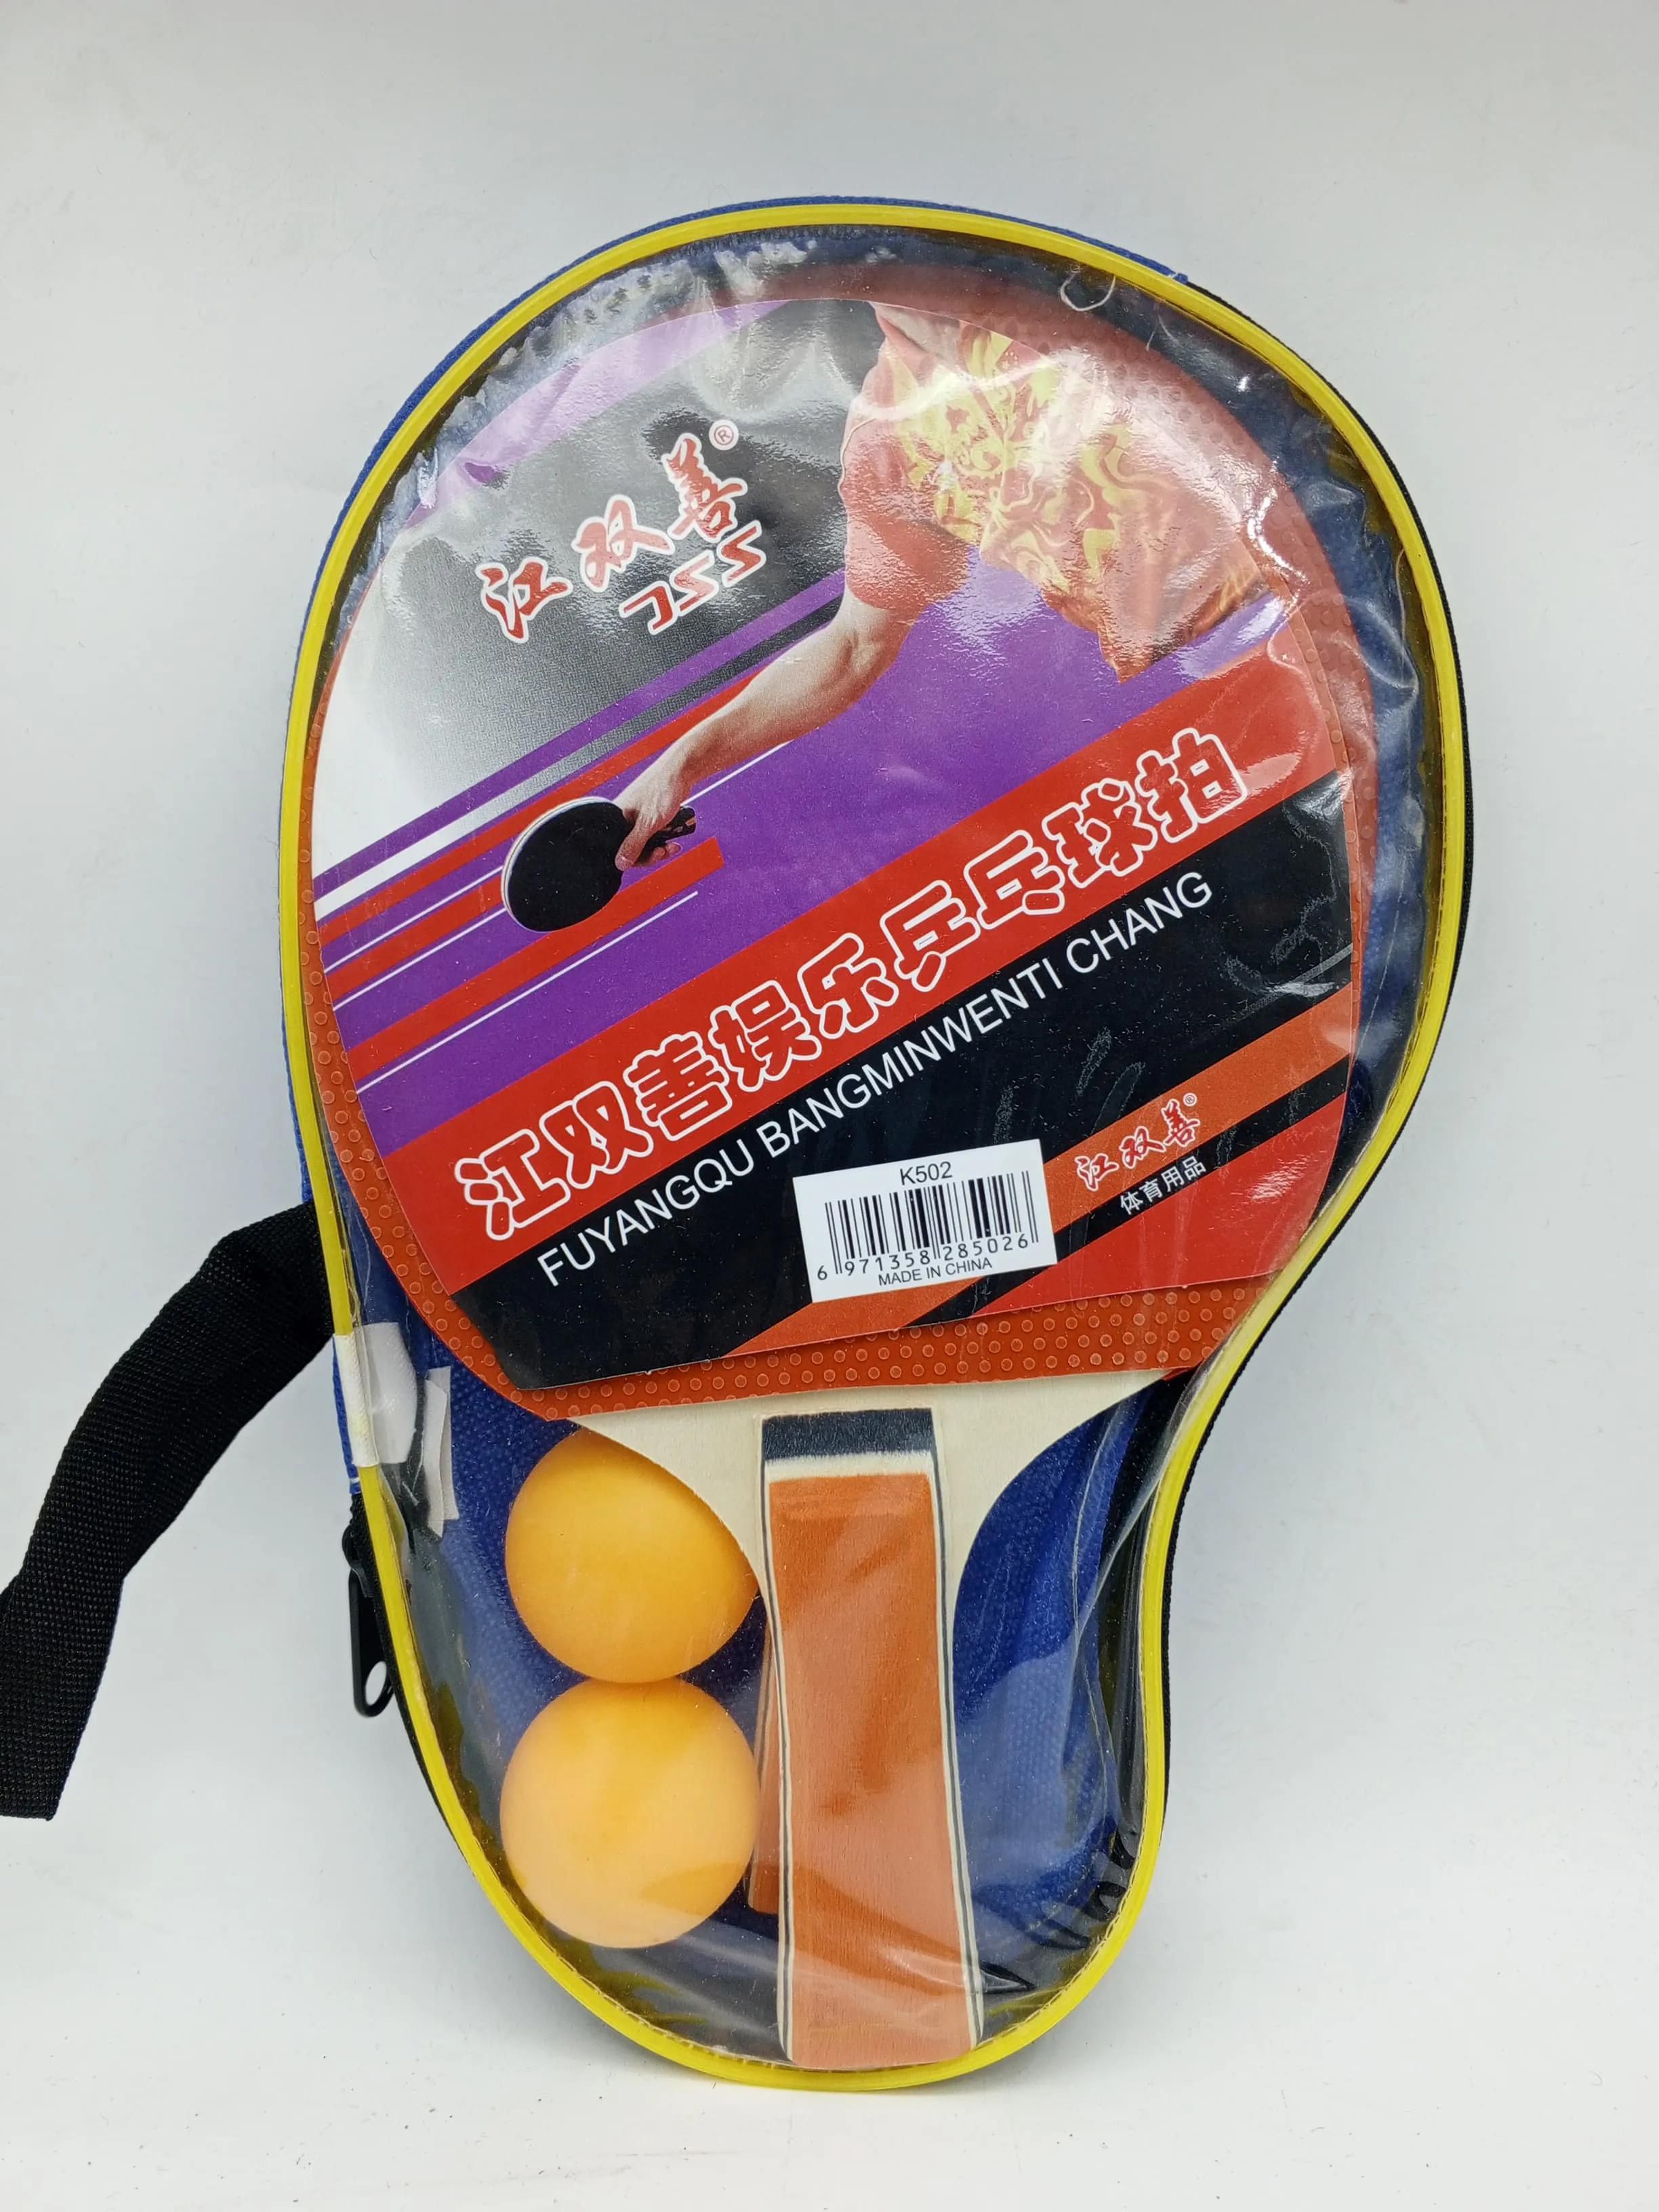 (STANDARD QUALITY)TABLE TENNIS Play Game Ping-Pong Racket Ping Pong Bat Paddler. With 2 table tennis balls